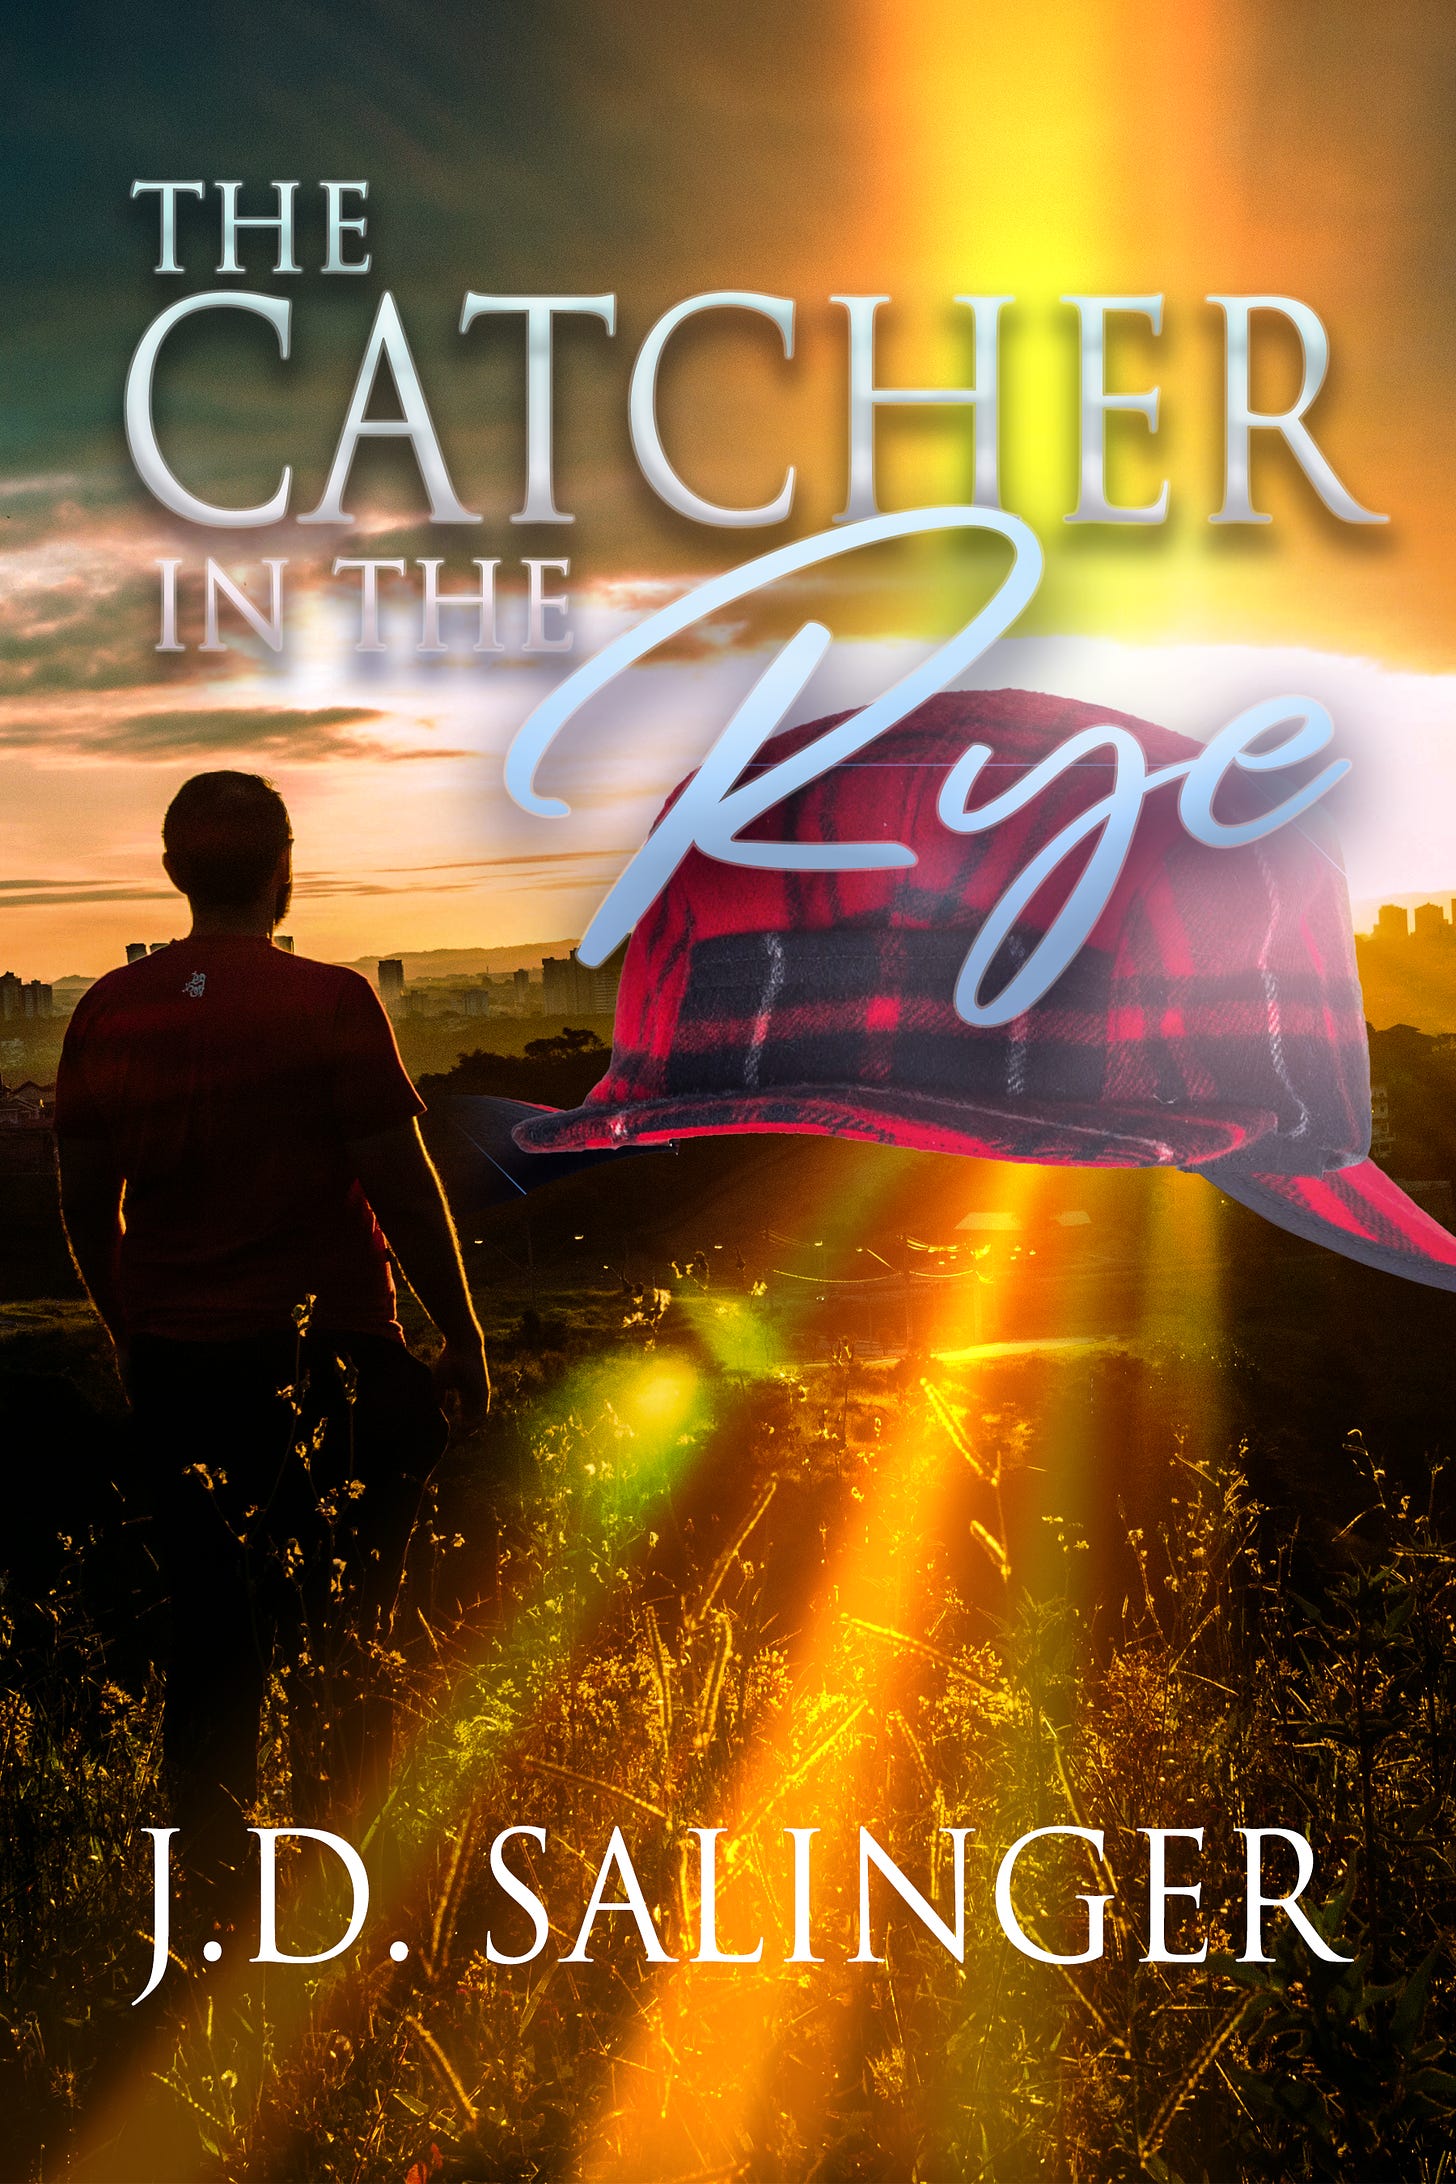 The Catcher In the Rye by J.D. Salinger. Holden, silhouetted, stands in a field at sunlight. The red plaid deerstalker hat is floating and radiating light. It is cheesy af.